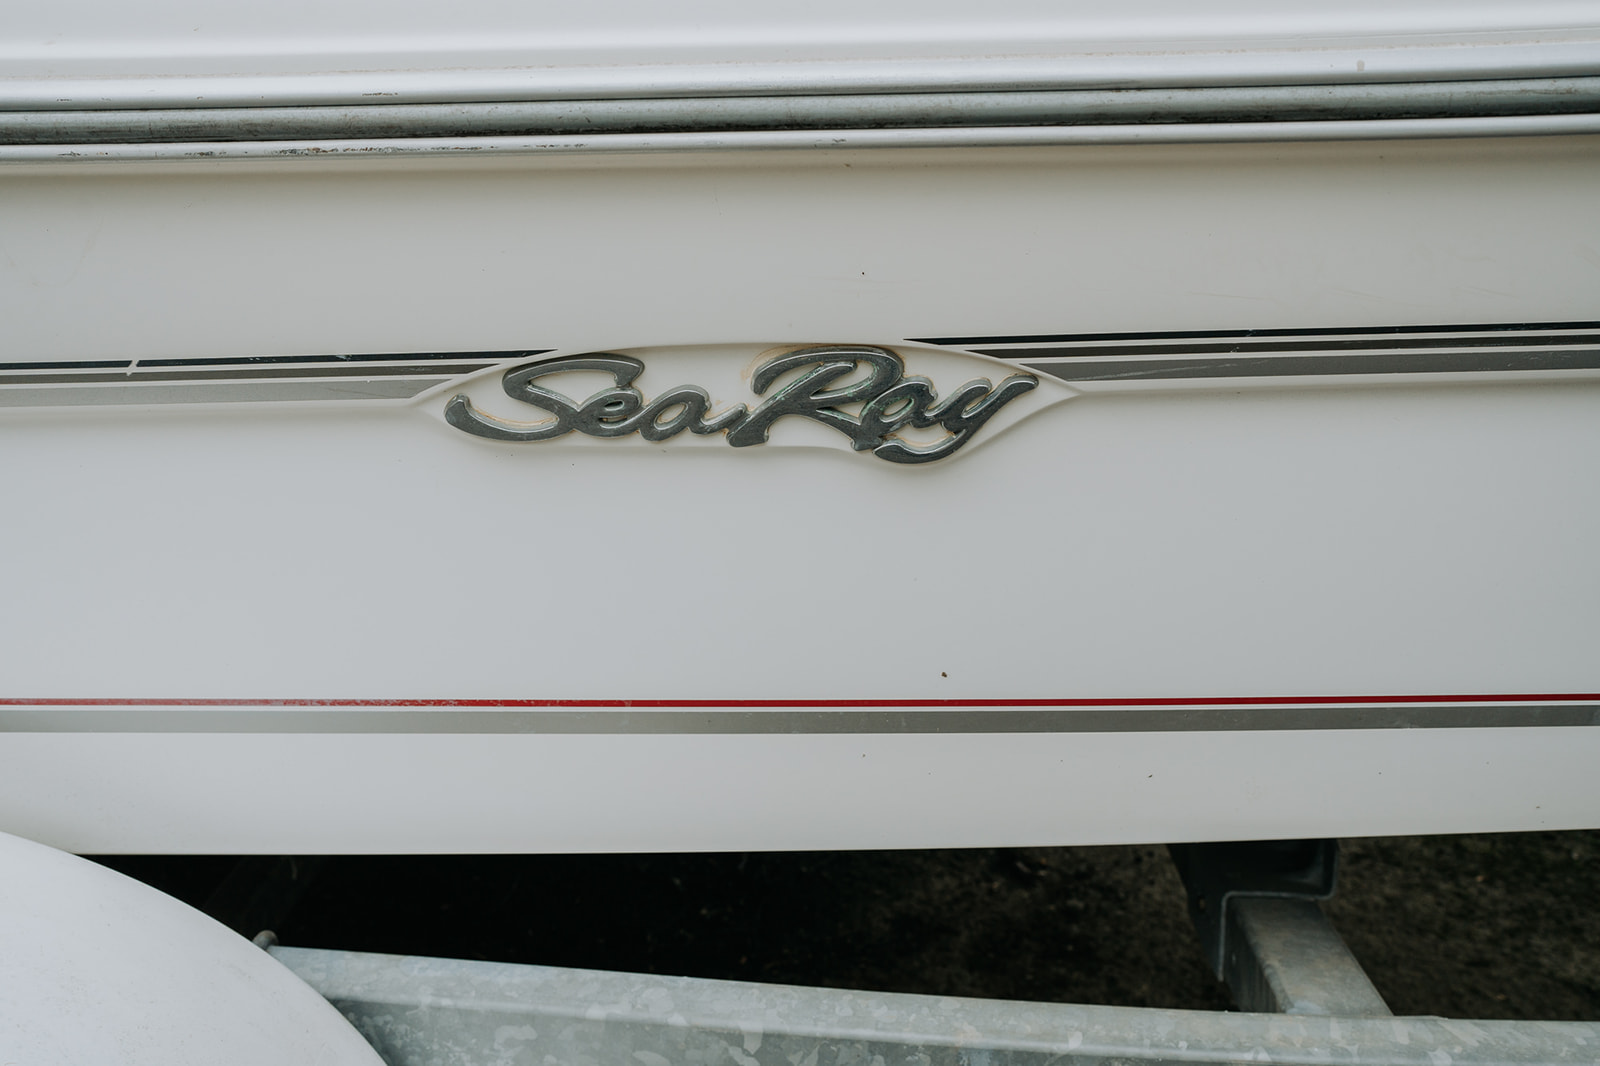 1991 Sea Ray 170 Bowrider Power boat for sale in Asheville, NC - image 15 